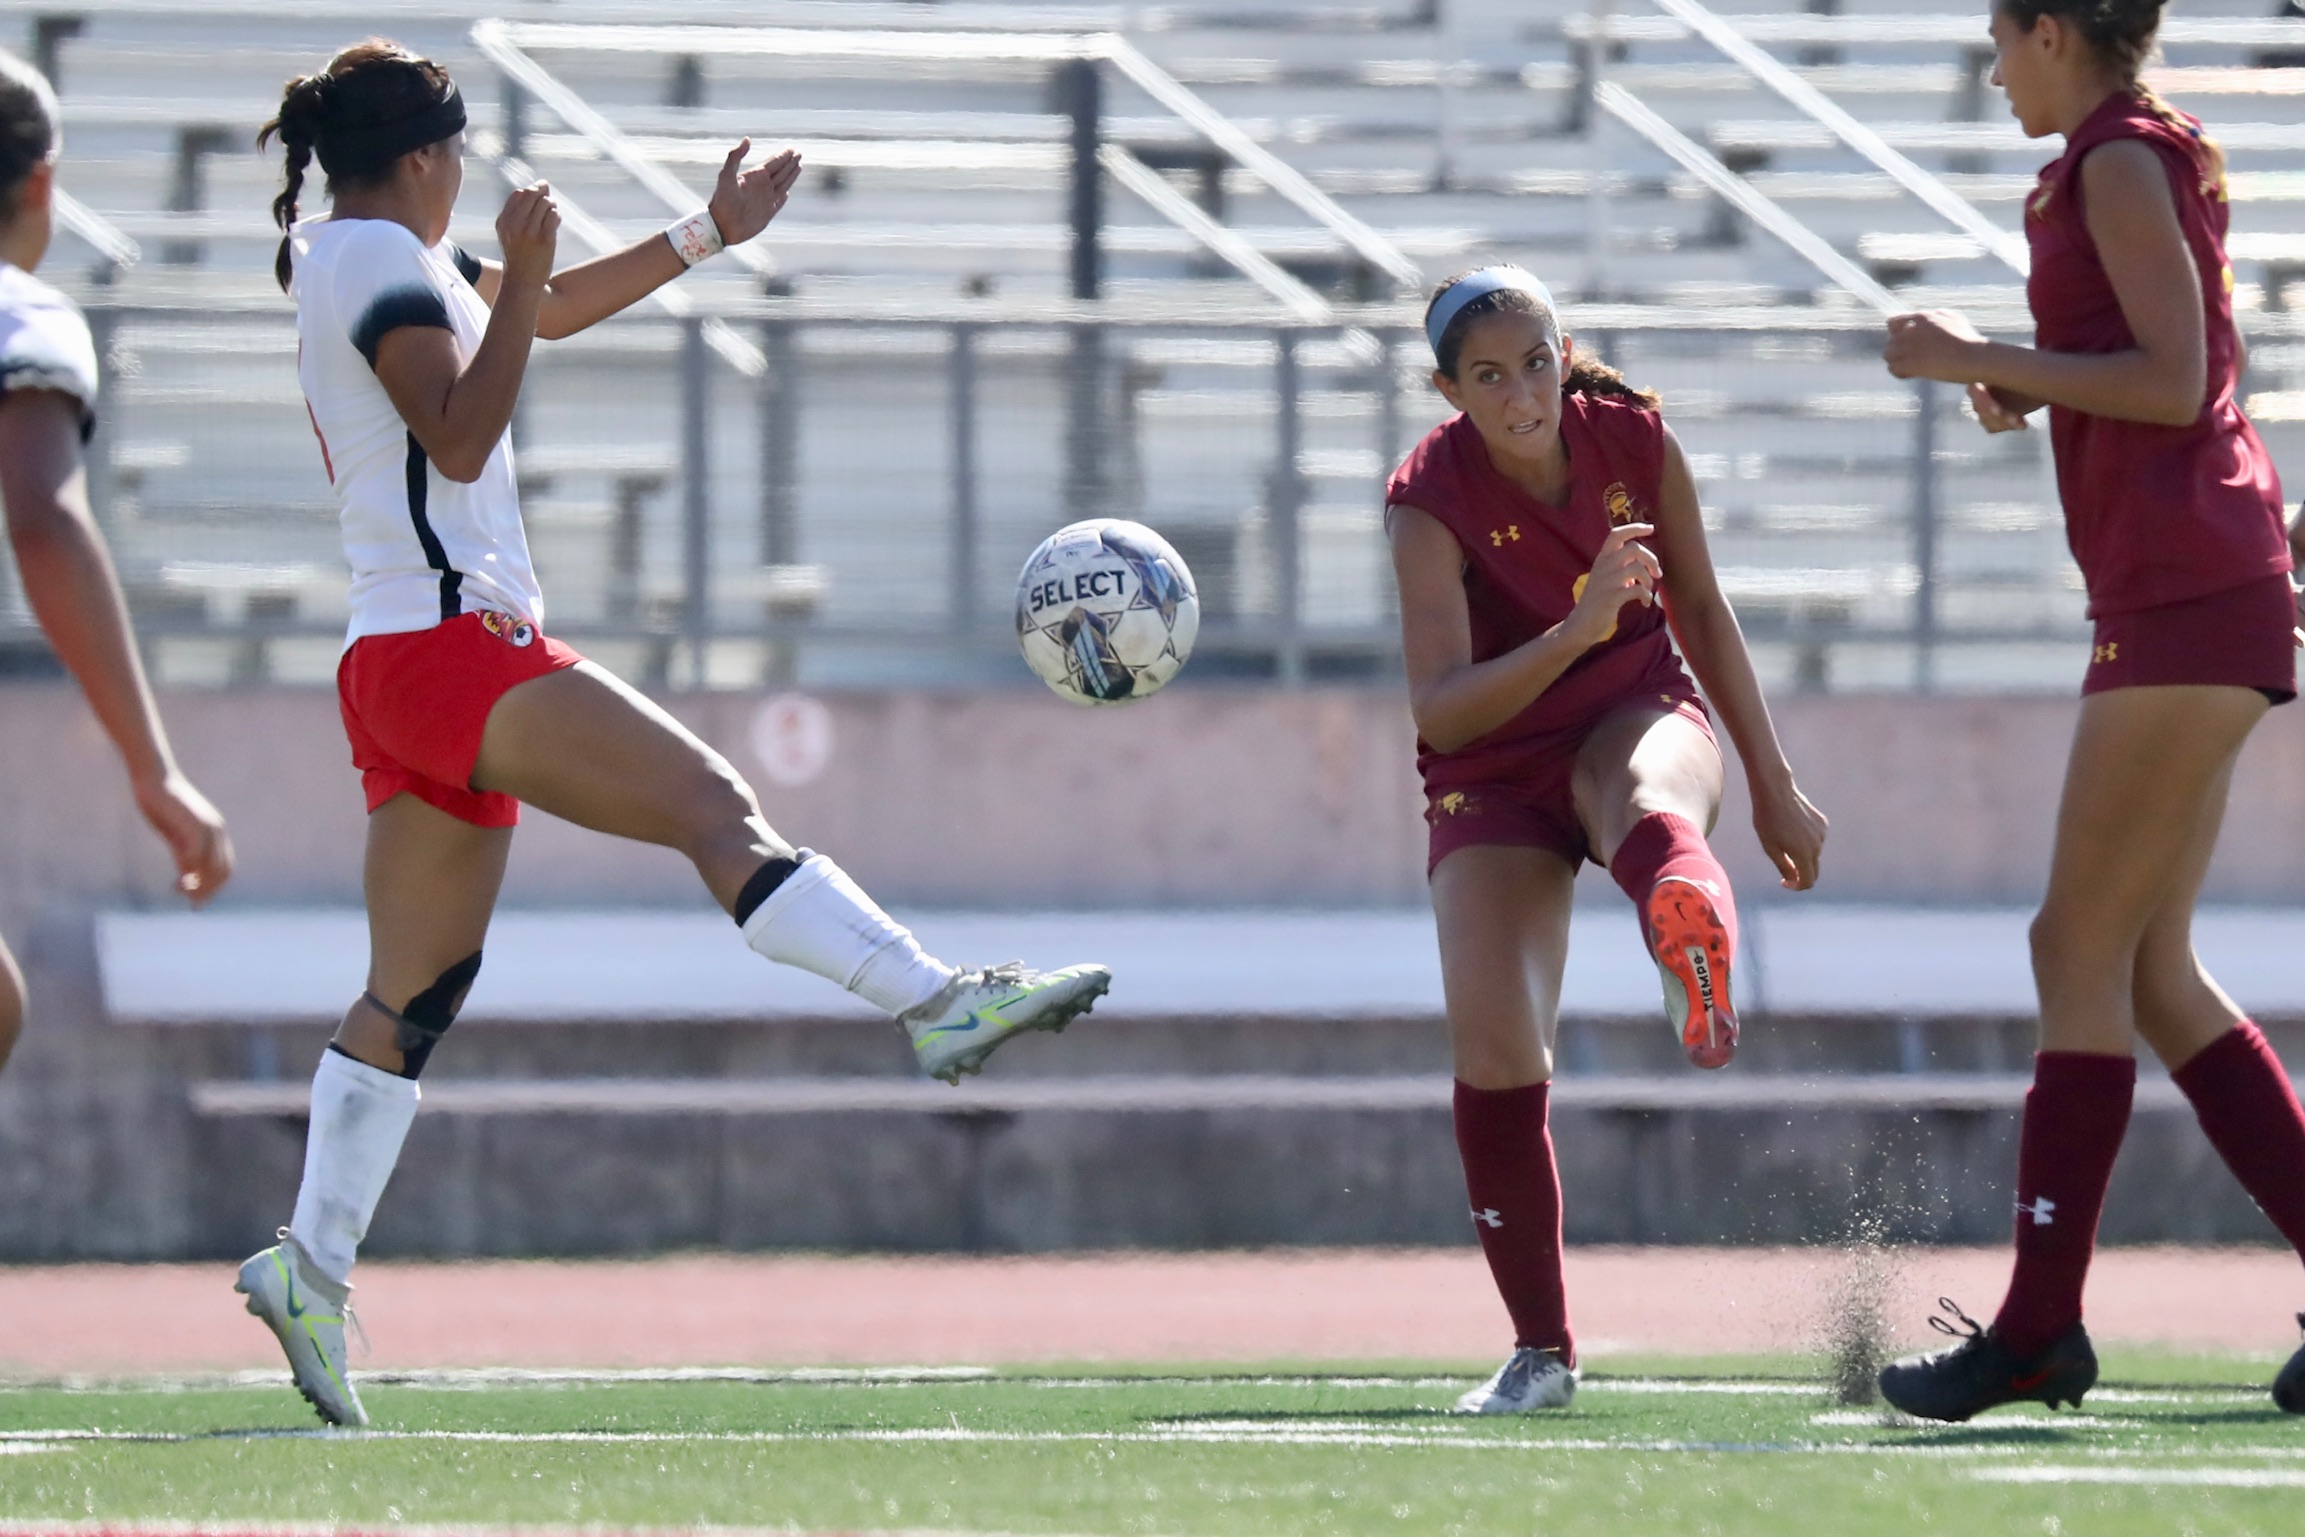 Gabby Morales tallied two assists in PCC's win on Friday.